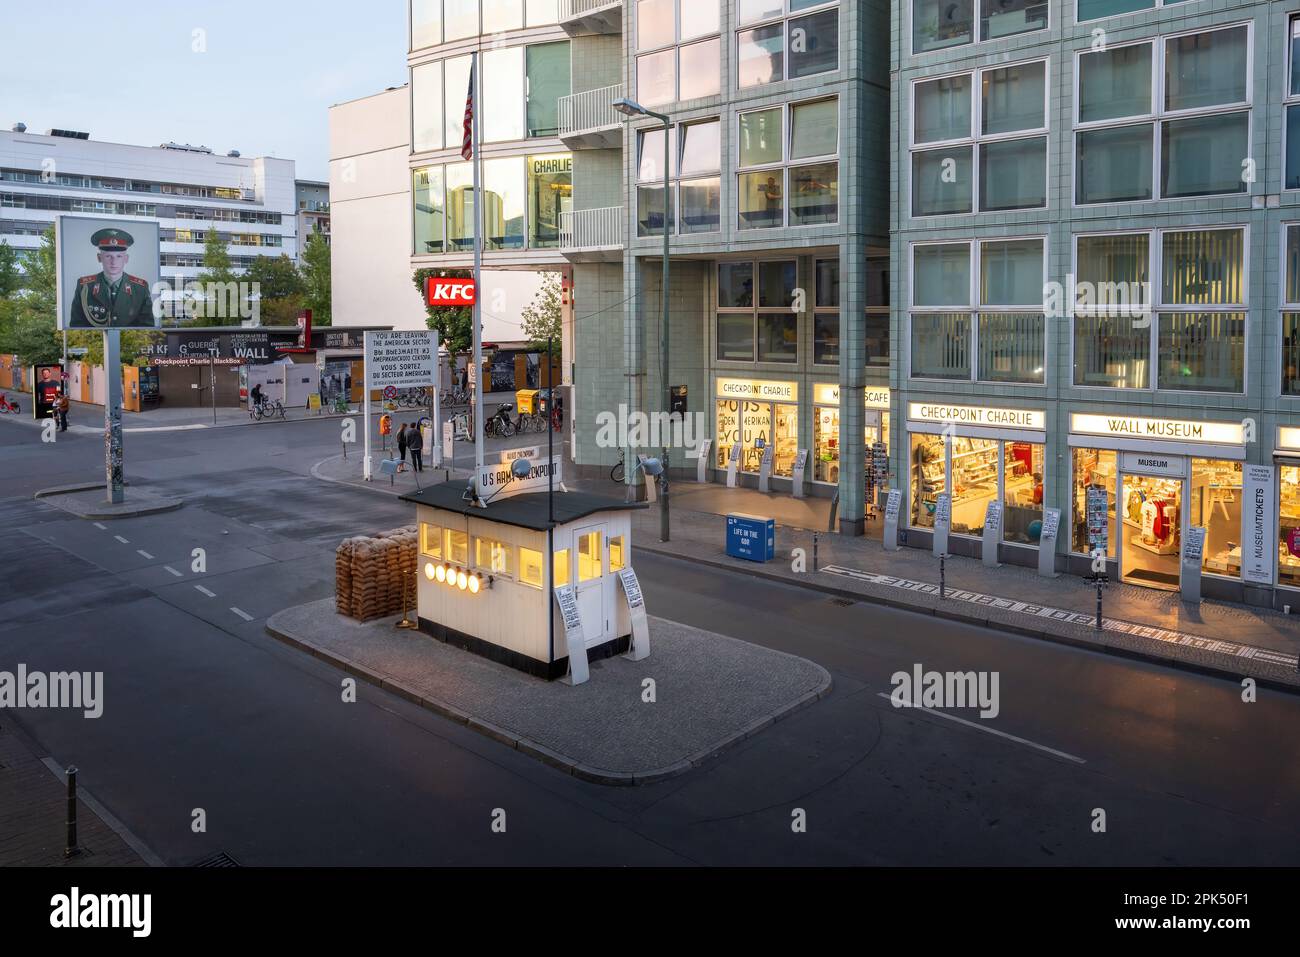 Aerial view of Checkpoint Charlie former Berlin Wall Crossing point - Berlin, Germany Stock Photo